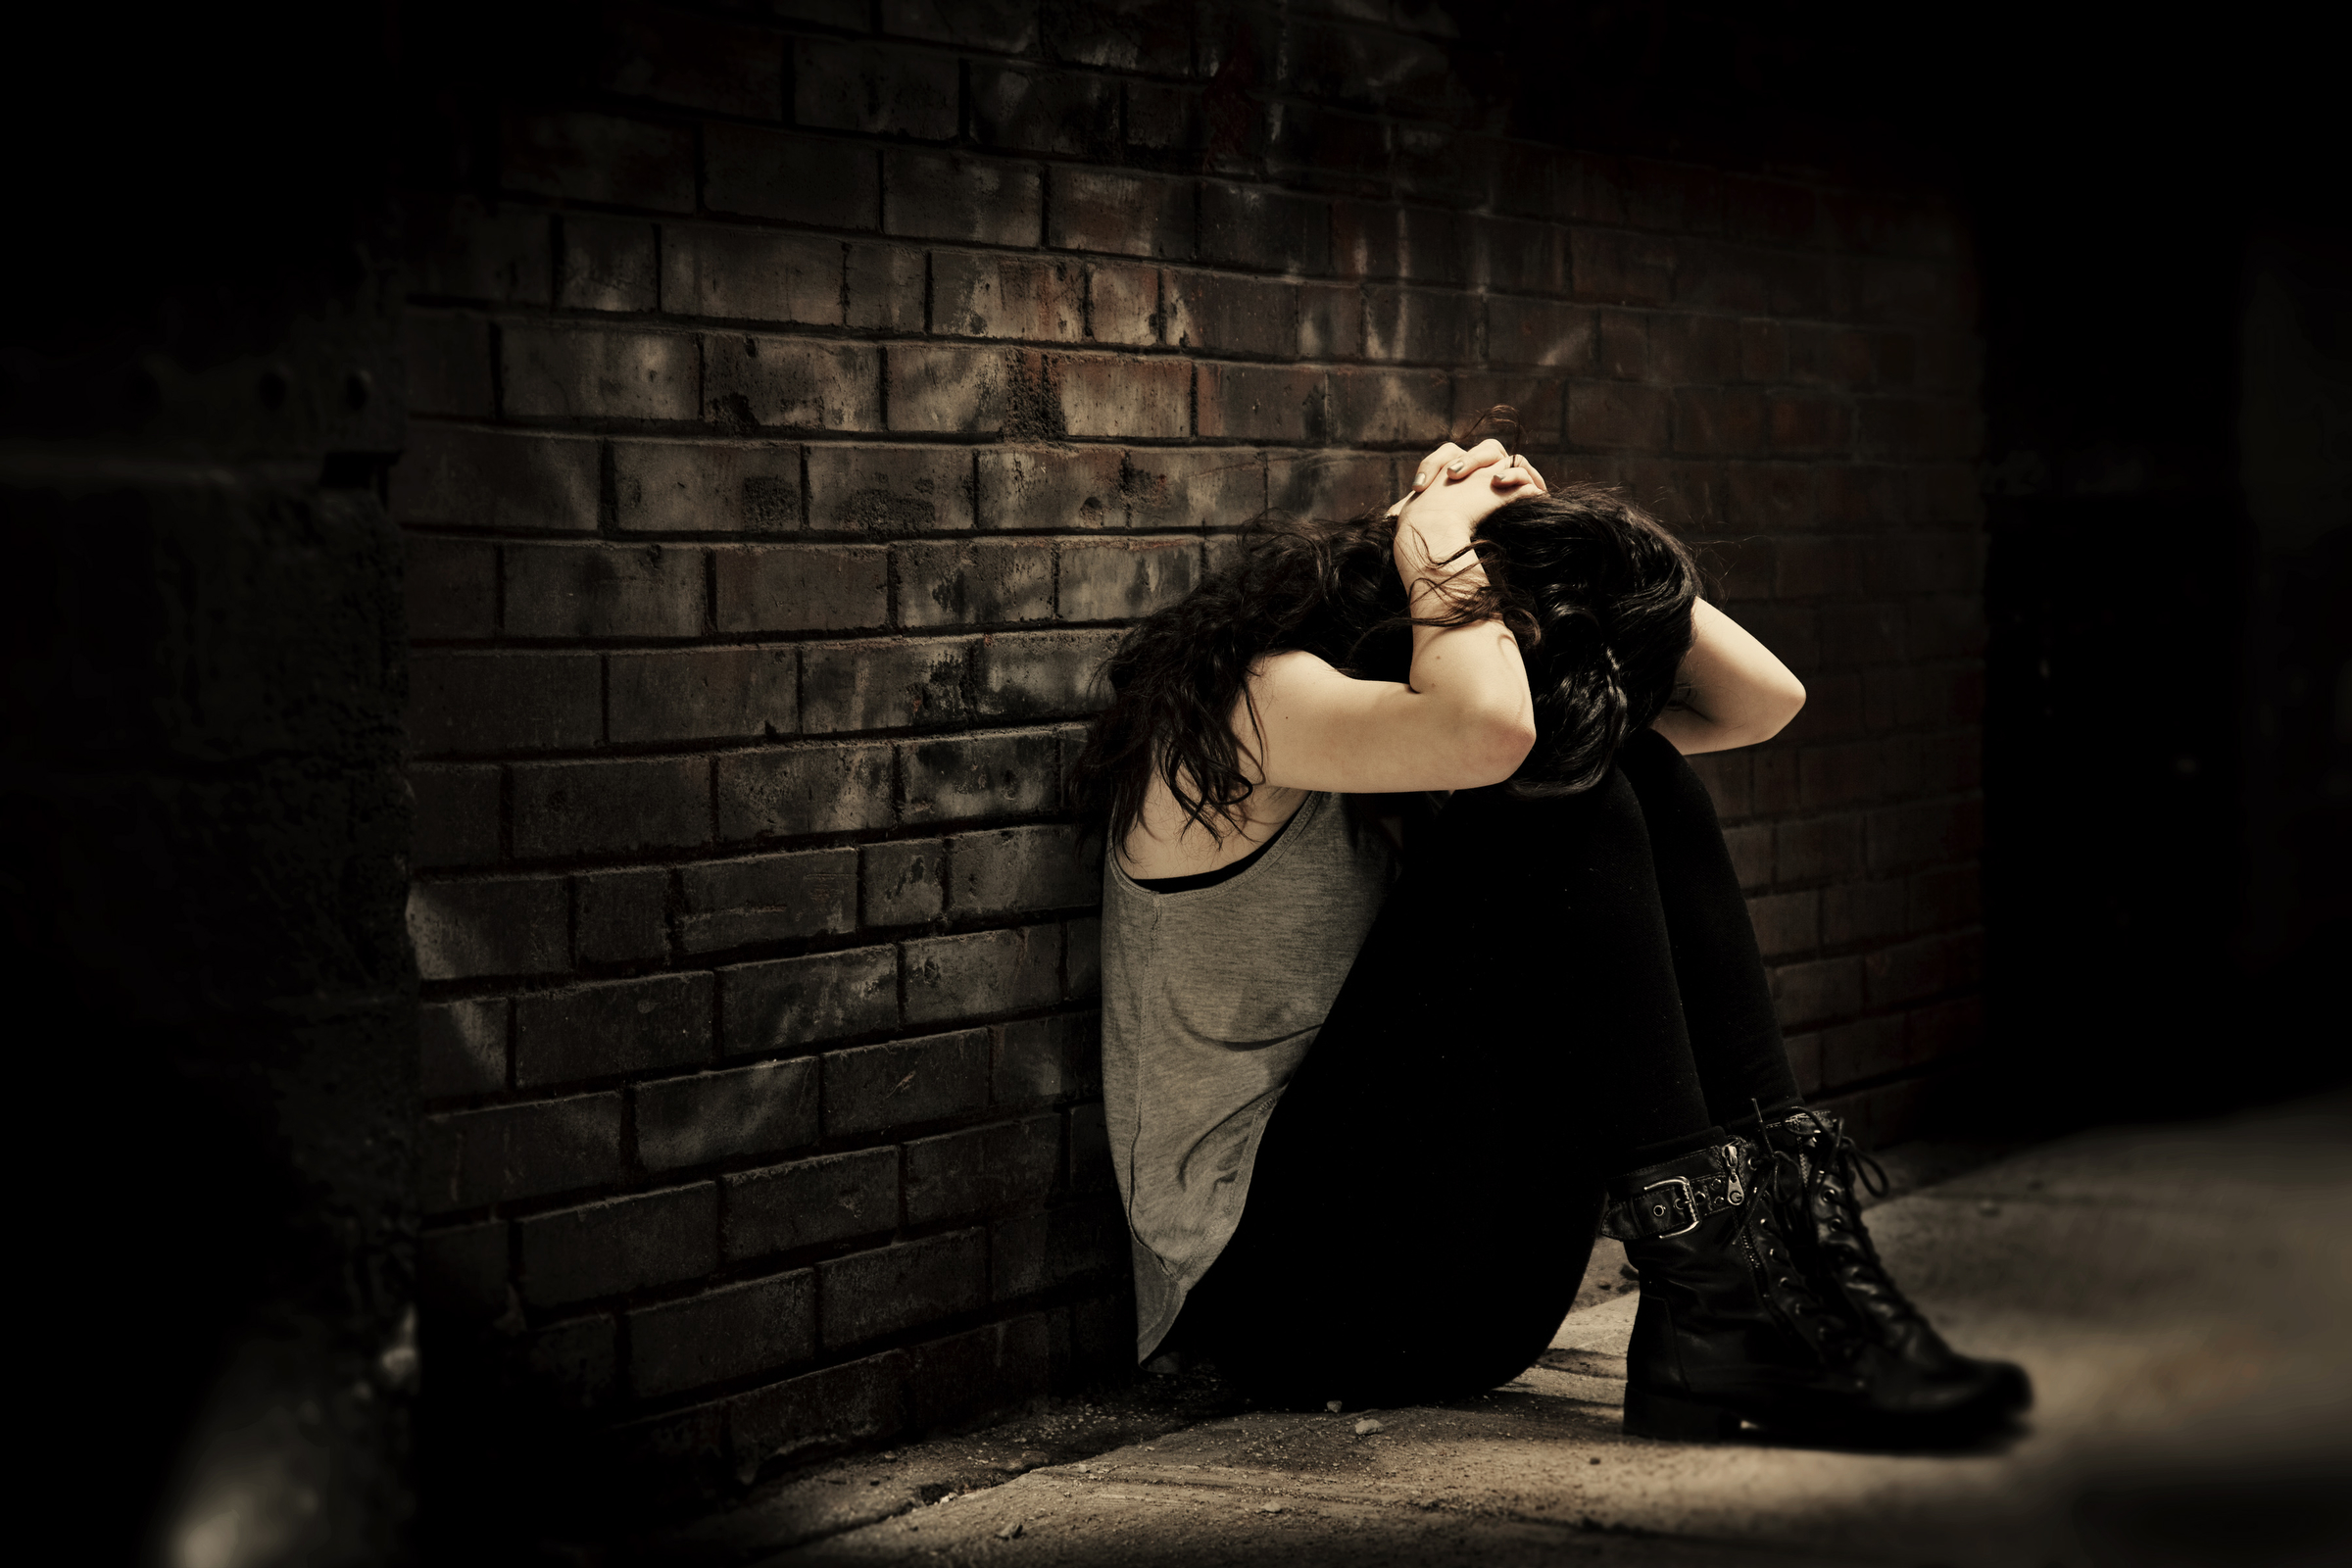 Photo Illustration Picturing Young Woman Depicts Effects Of Human Trafficking The Catholic Sun 6249